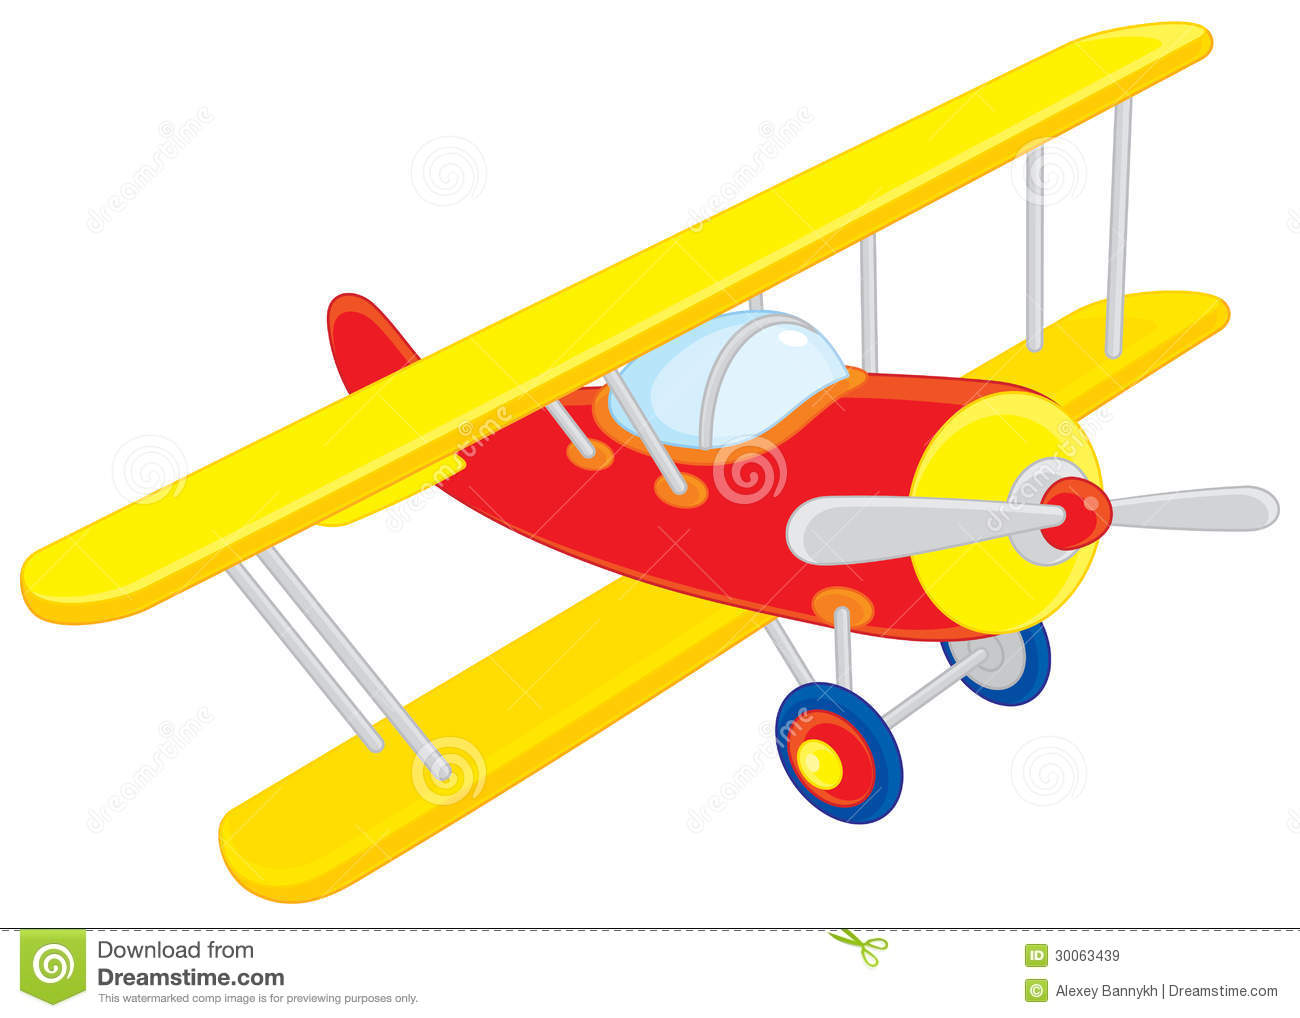 Toy Plane Vector Clip Art On A White Background